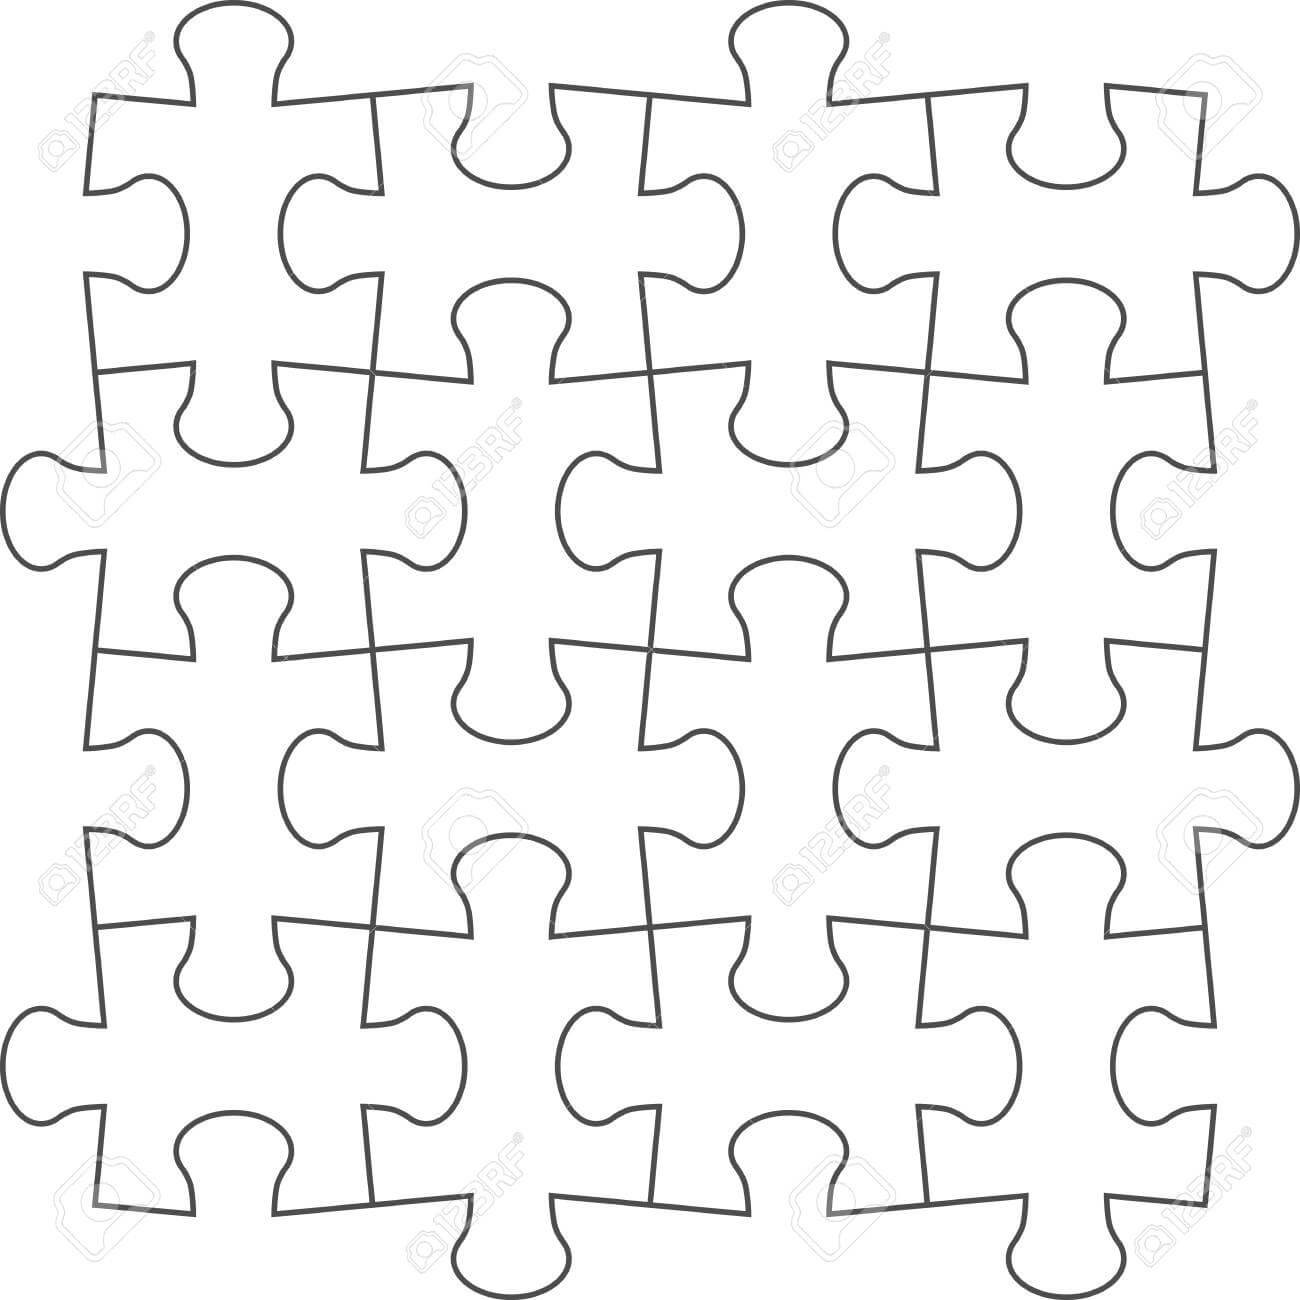 Jigsaw Puzzle Blank Template Of A Simple 4X4. White With A Black.. Within Blank Jigsaw Piece Template